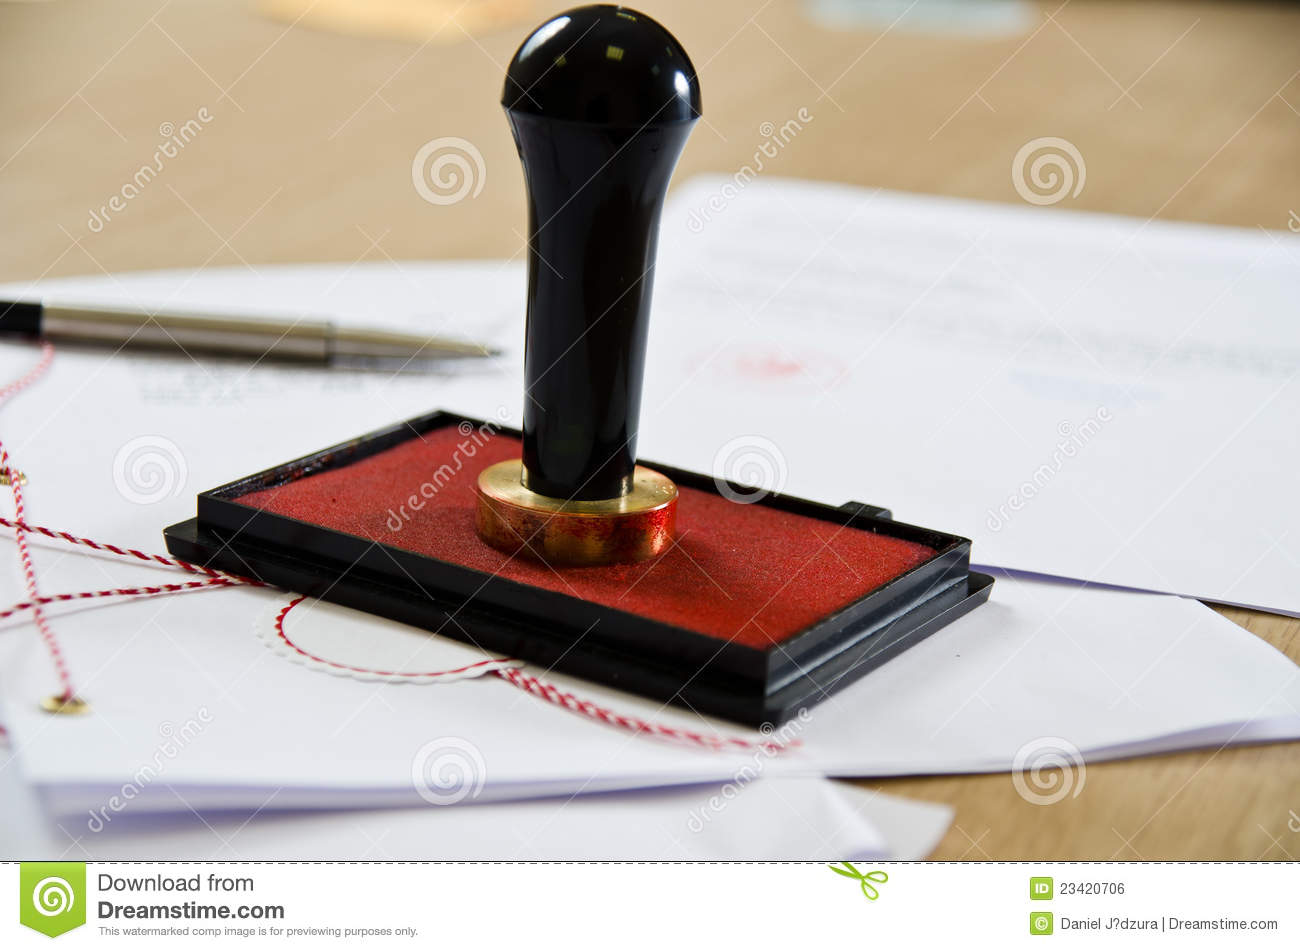 Notary Public Stamper Royalty Free Stock Image   Image  23420706